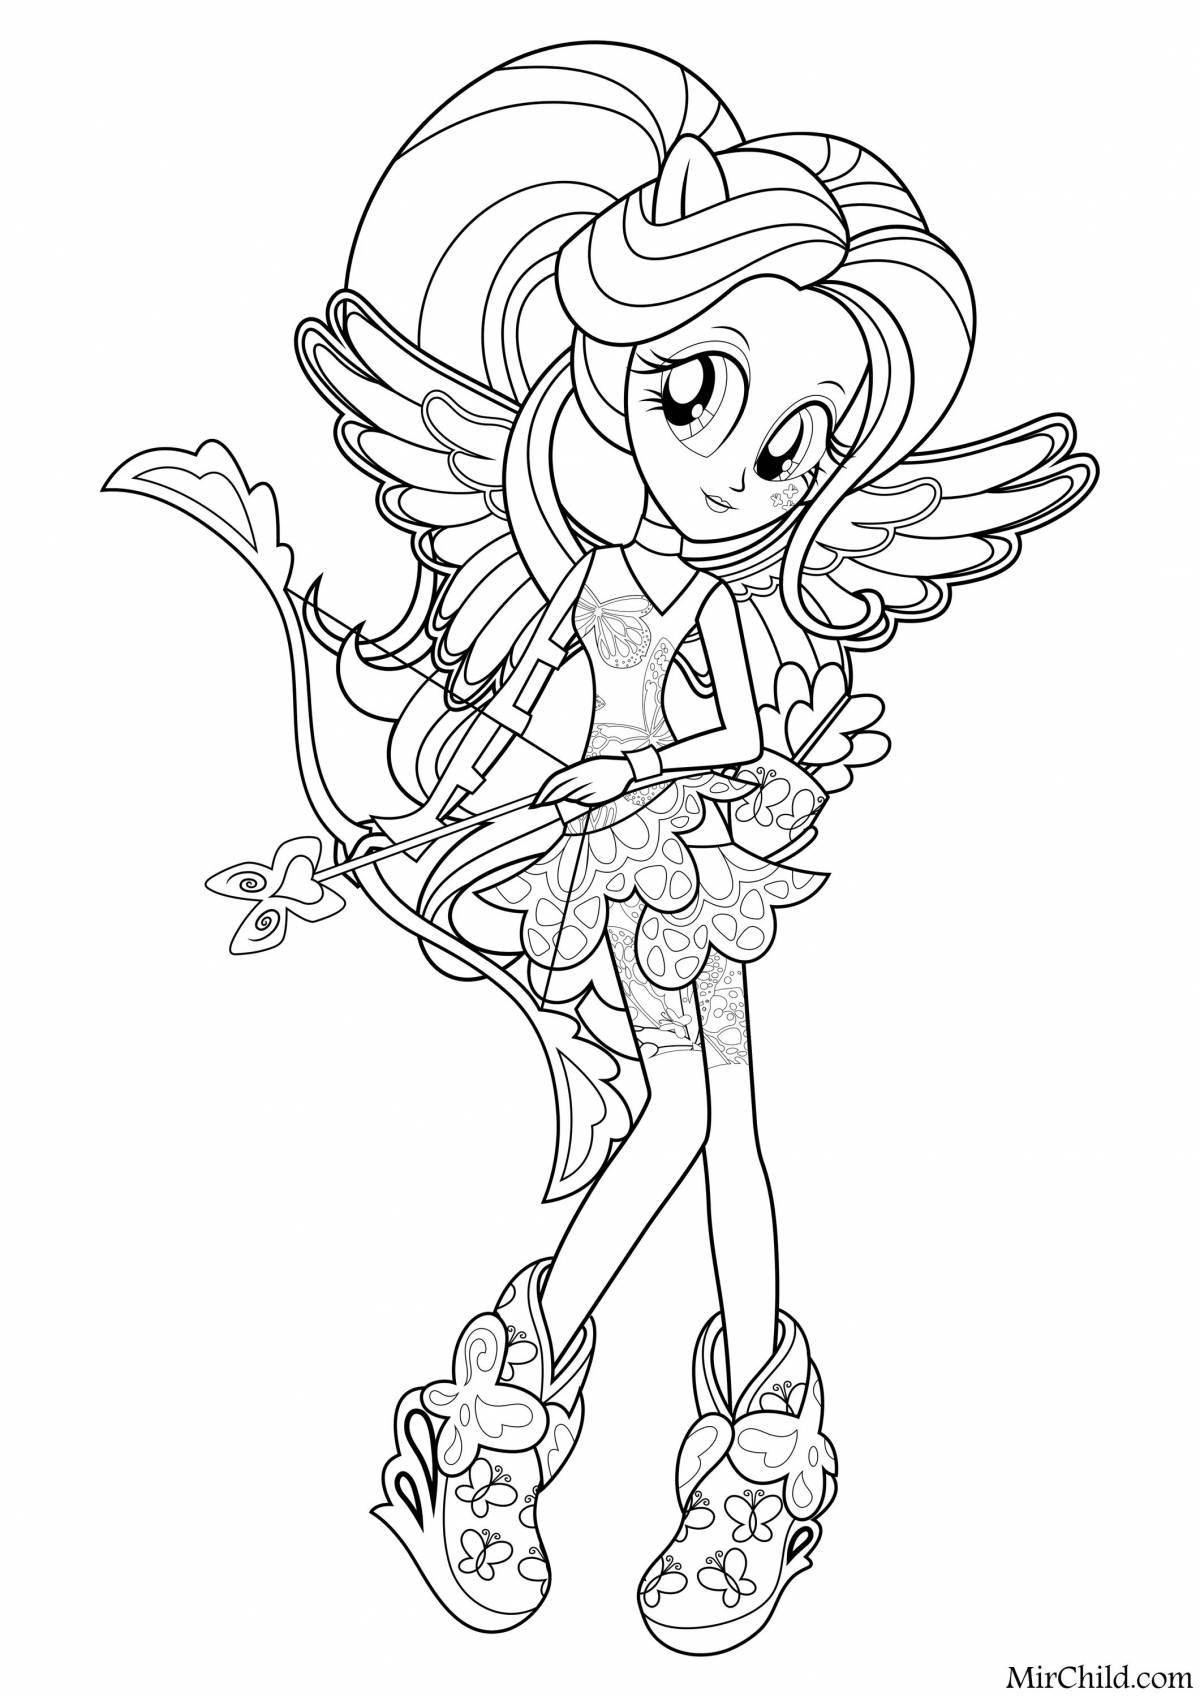 Playful little pony coloring page